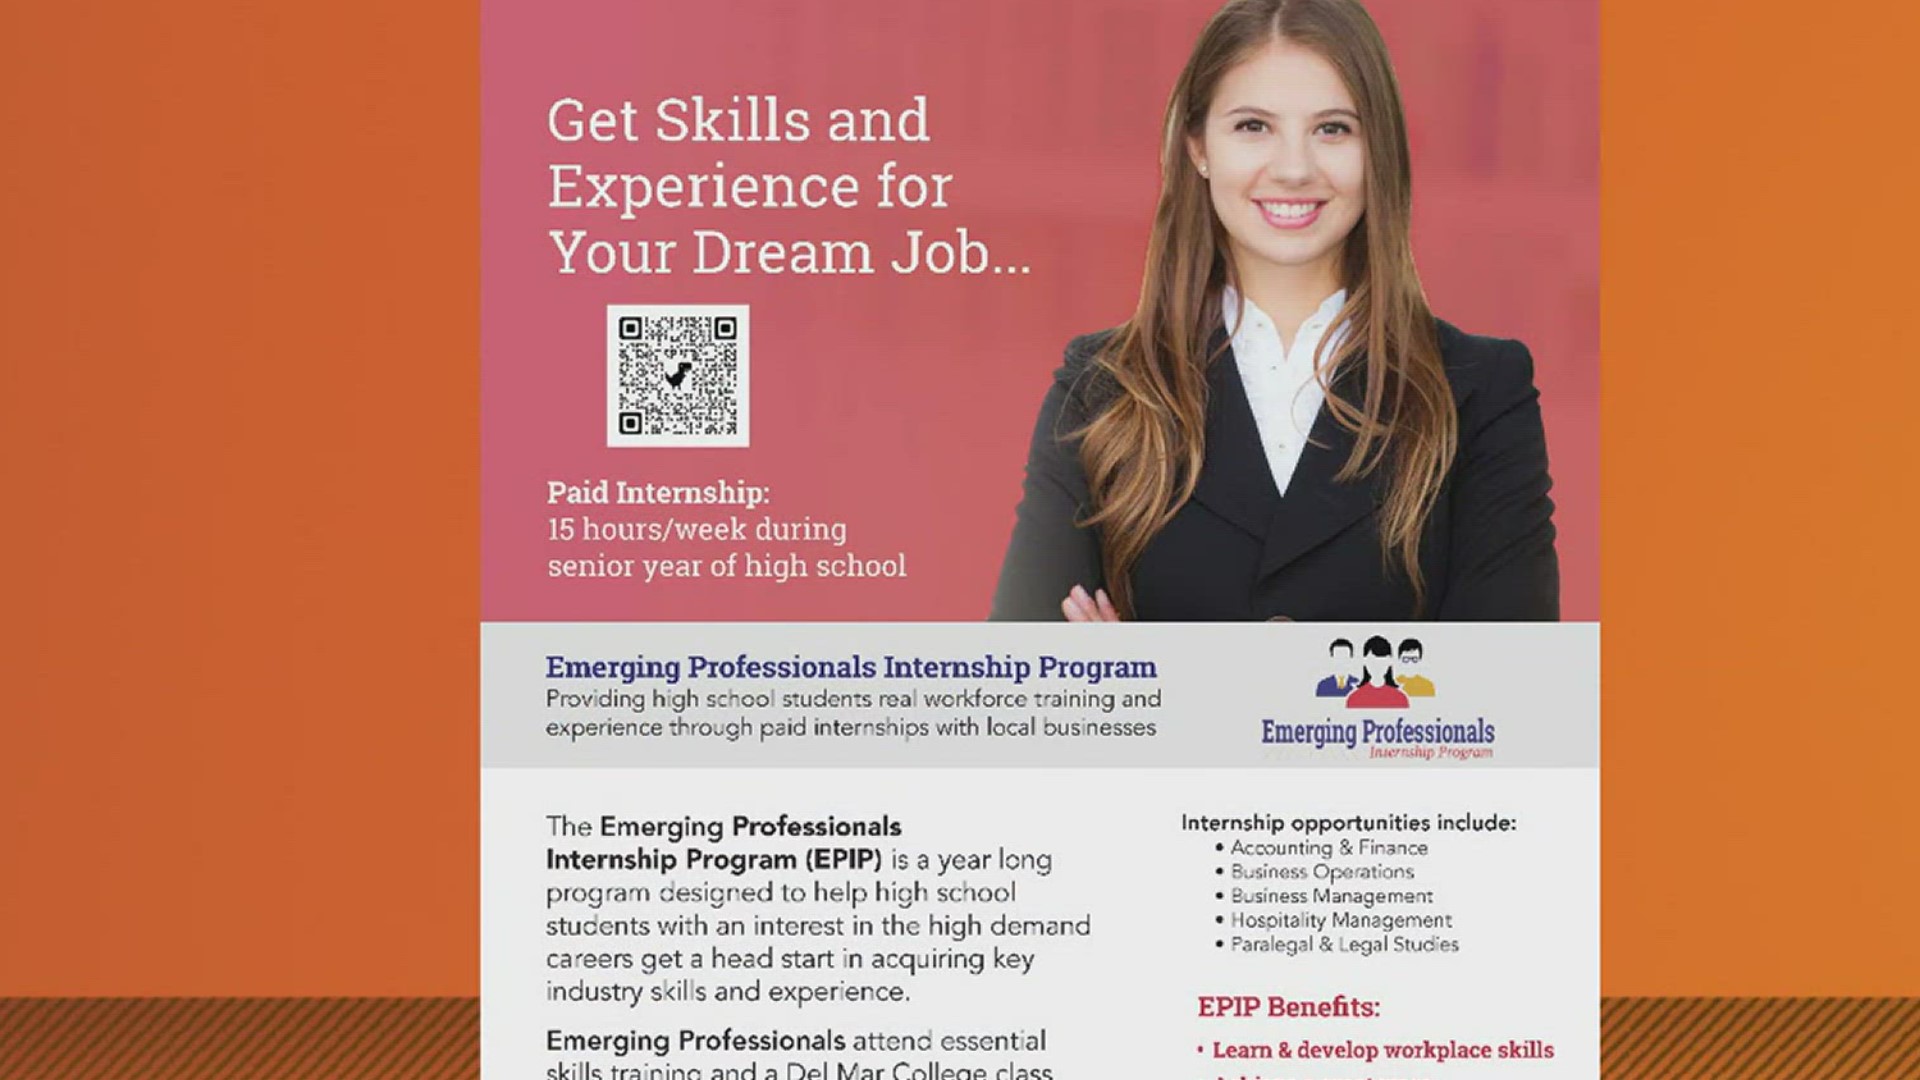 High school students will only thrive with real workforce training and experience. EPIP provides students with authentic experiences & connections while being paid.